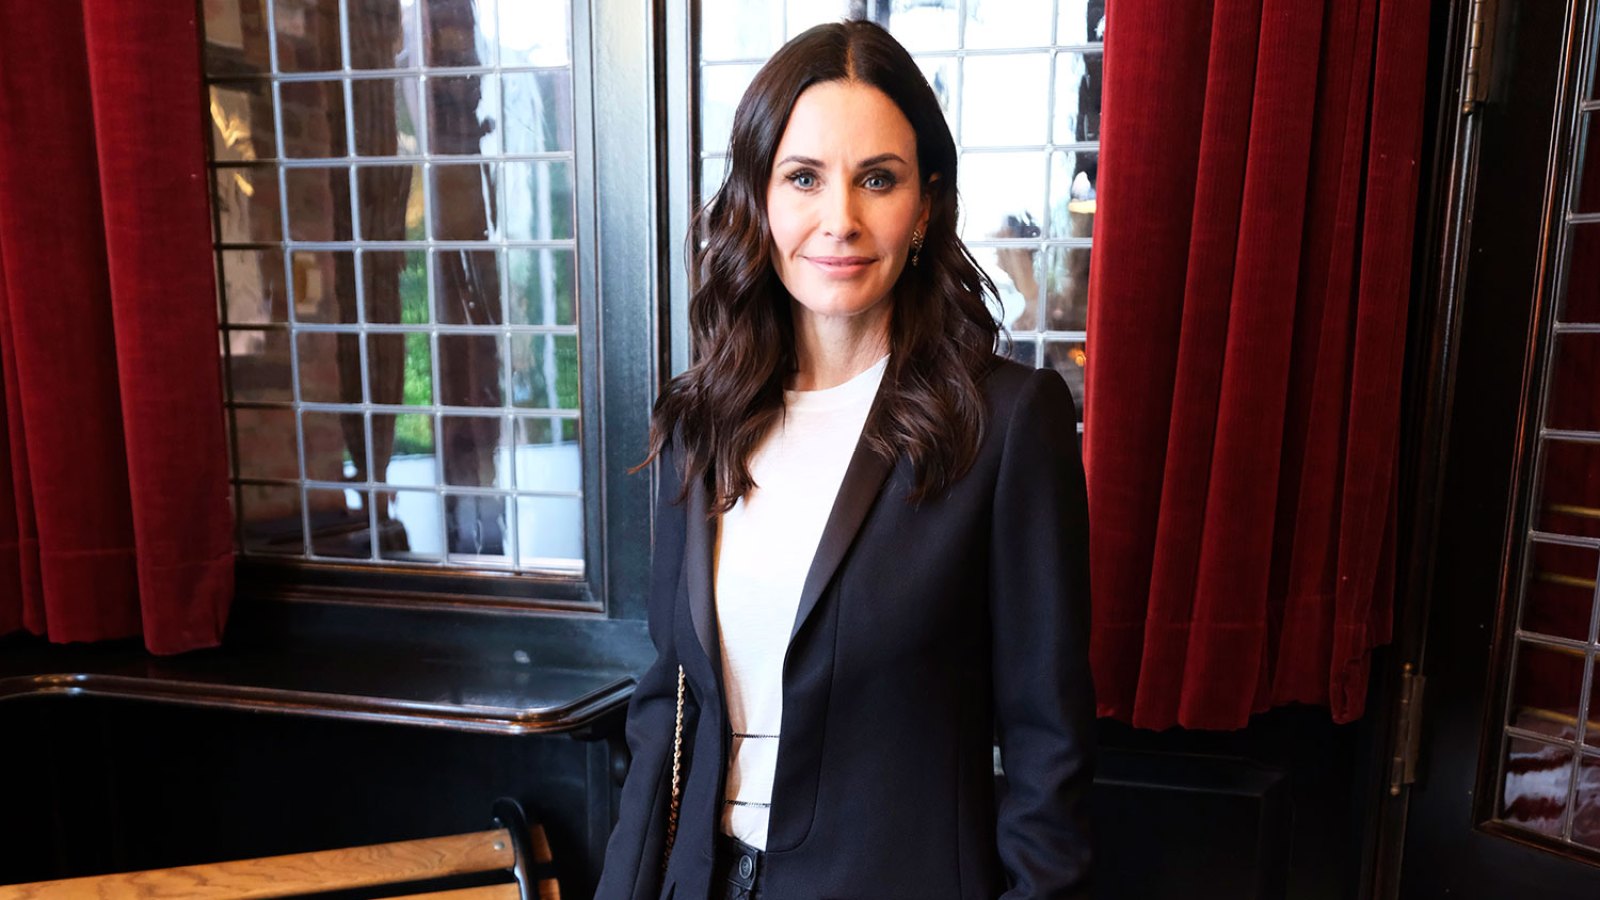 Courteney Cox: Why I Opened Up About Having Multiple Miscarriages in New Web Series